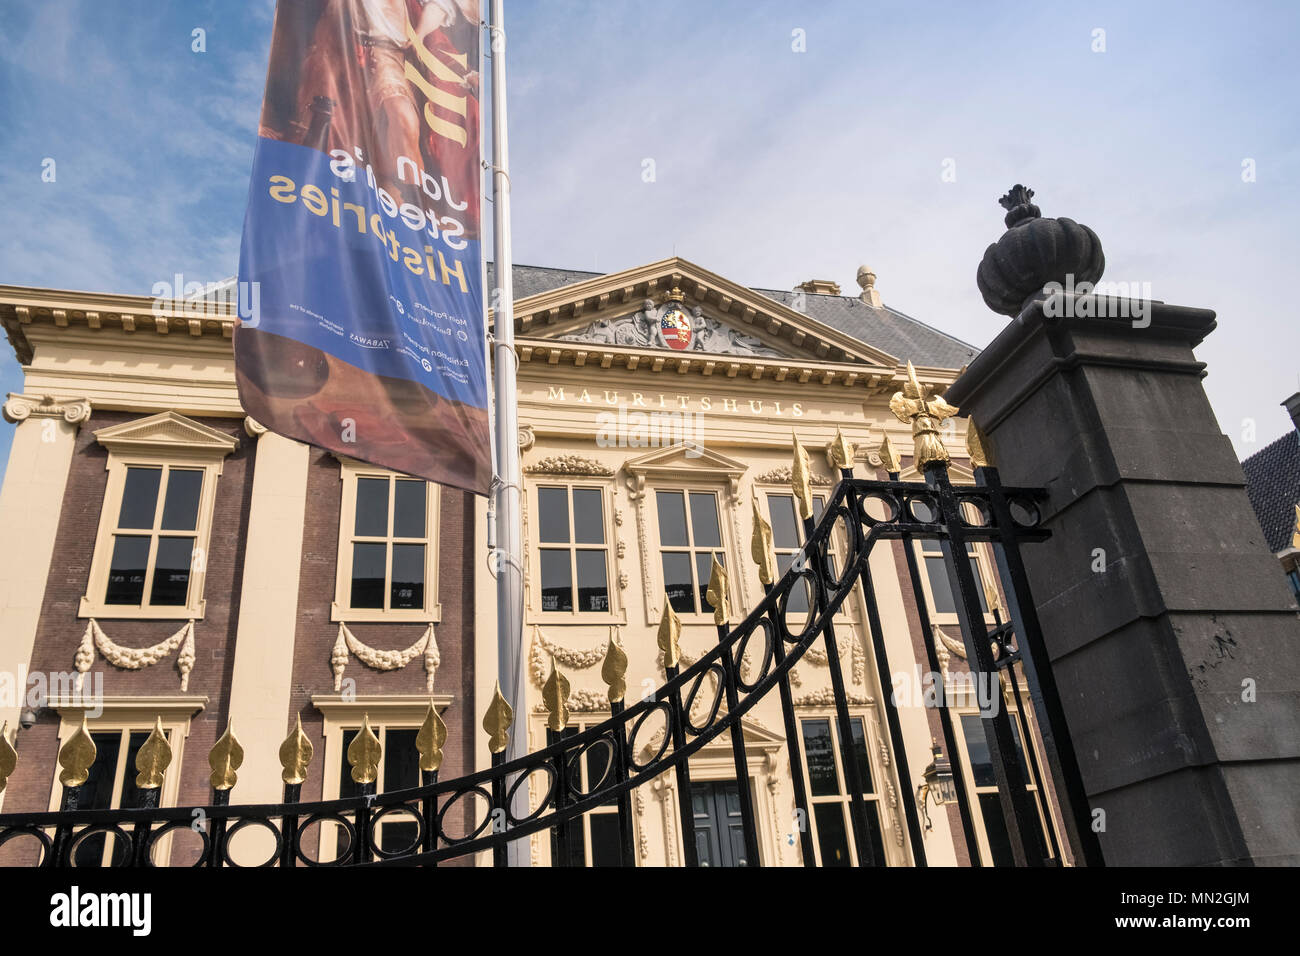 Exterior of Mauritshuis, an art gallery with Dutch paintings from the Golden Age, such as Vermeer's Girl with a Pearl Earring, The Hague, Netherlands. Stock Photo